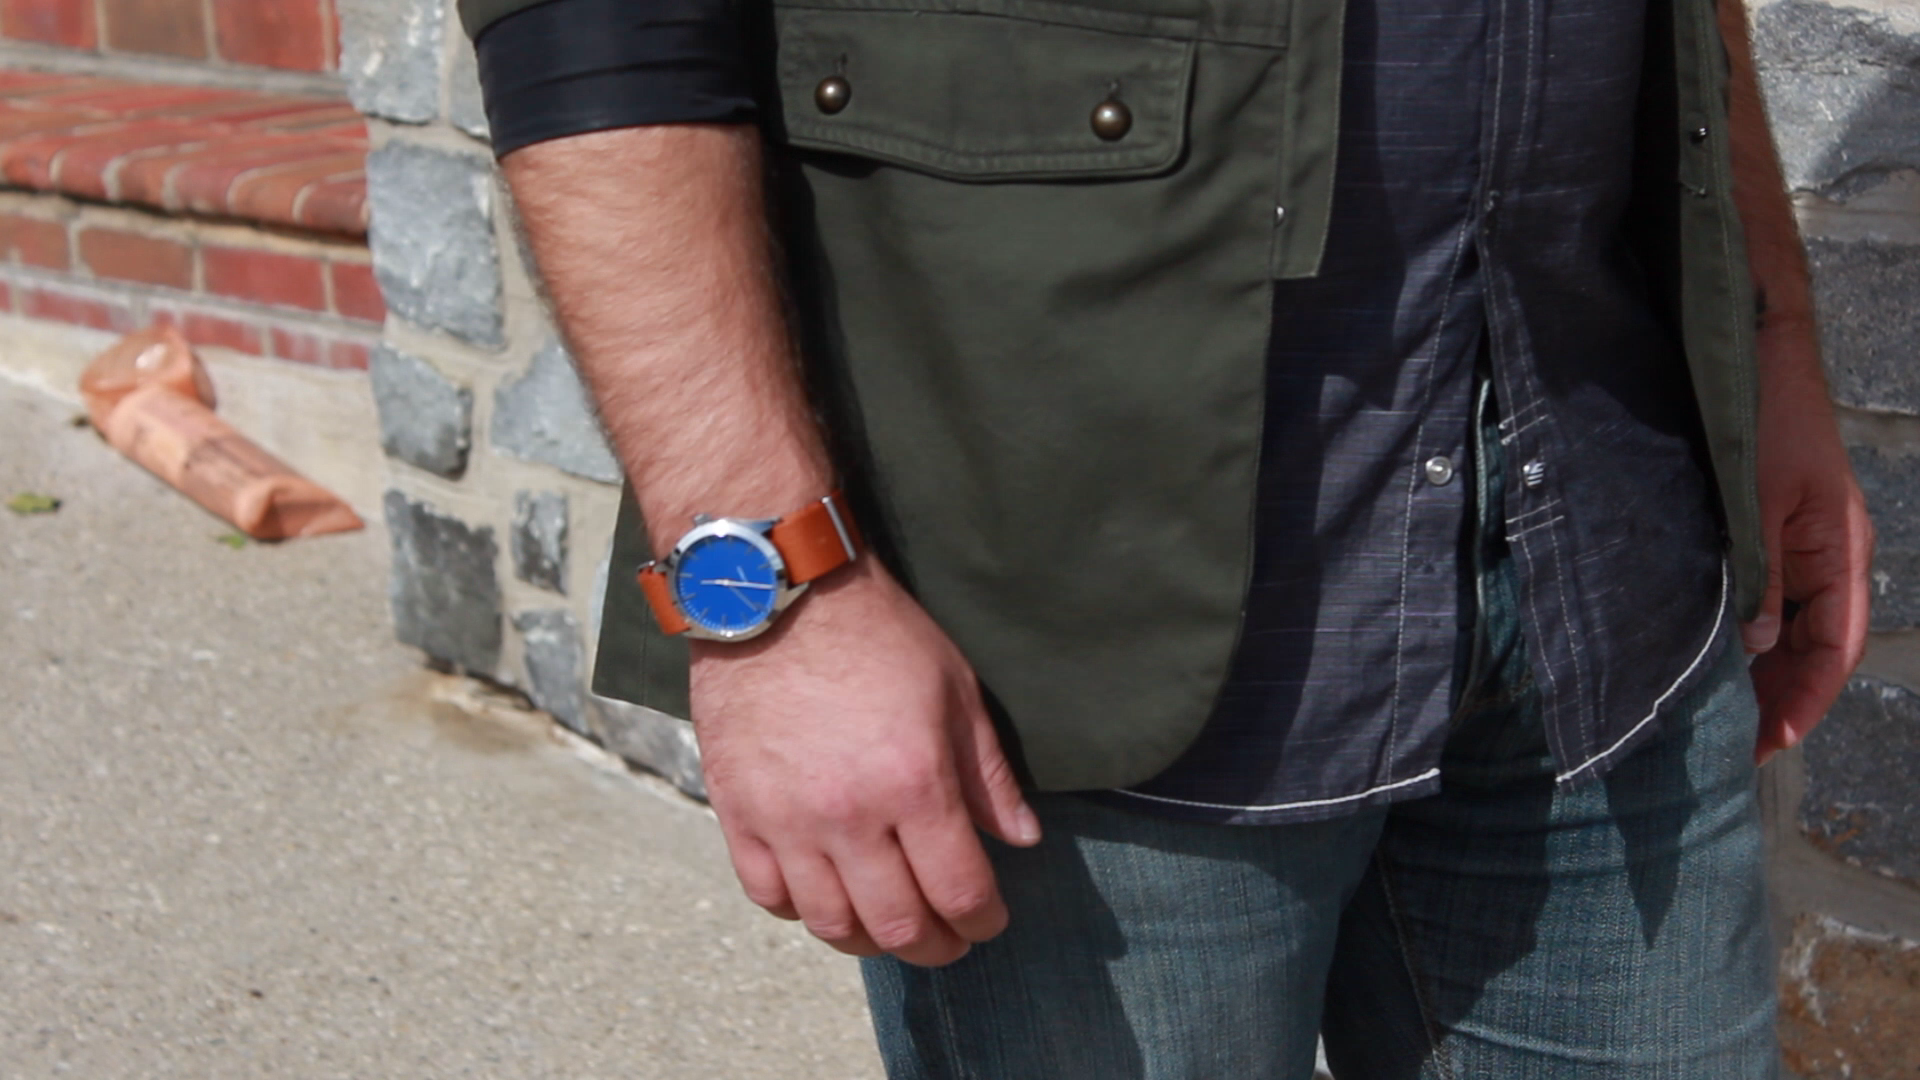 Assemble Your Own Wrist Watch